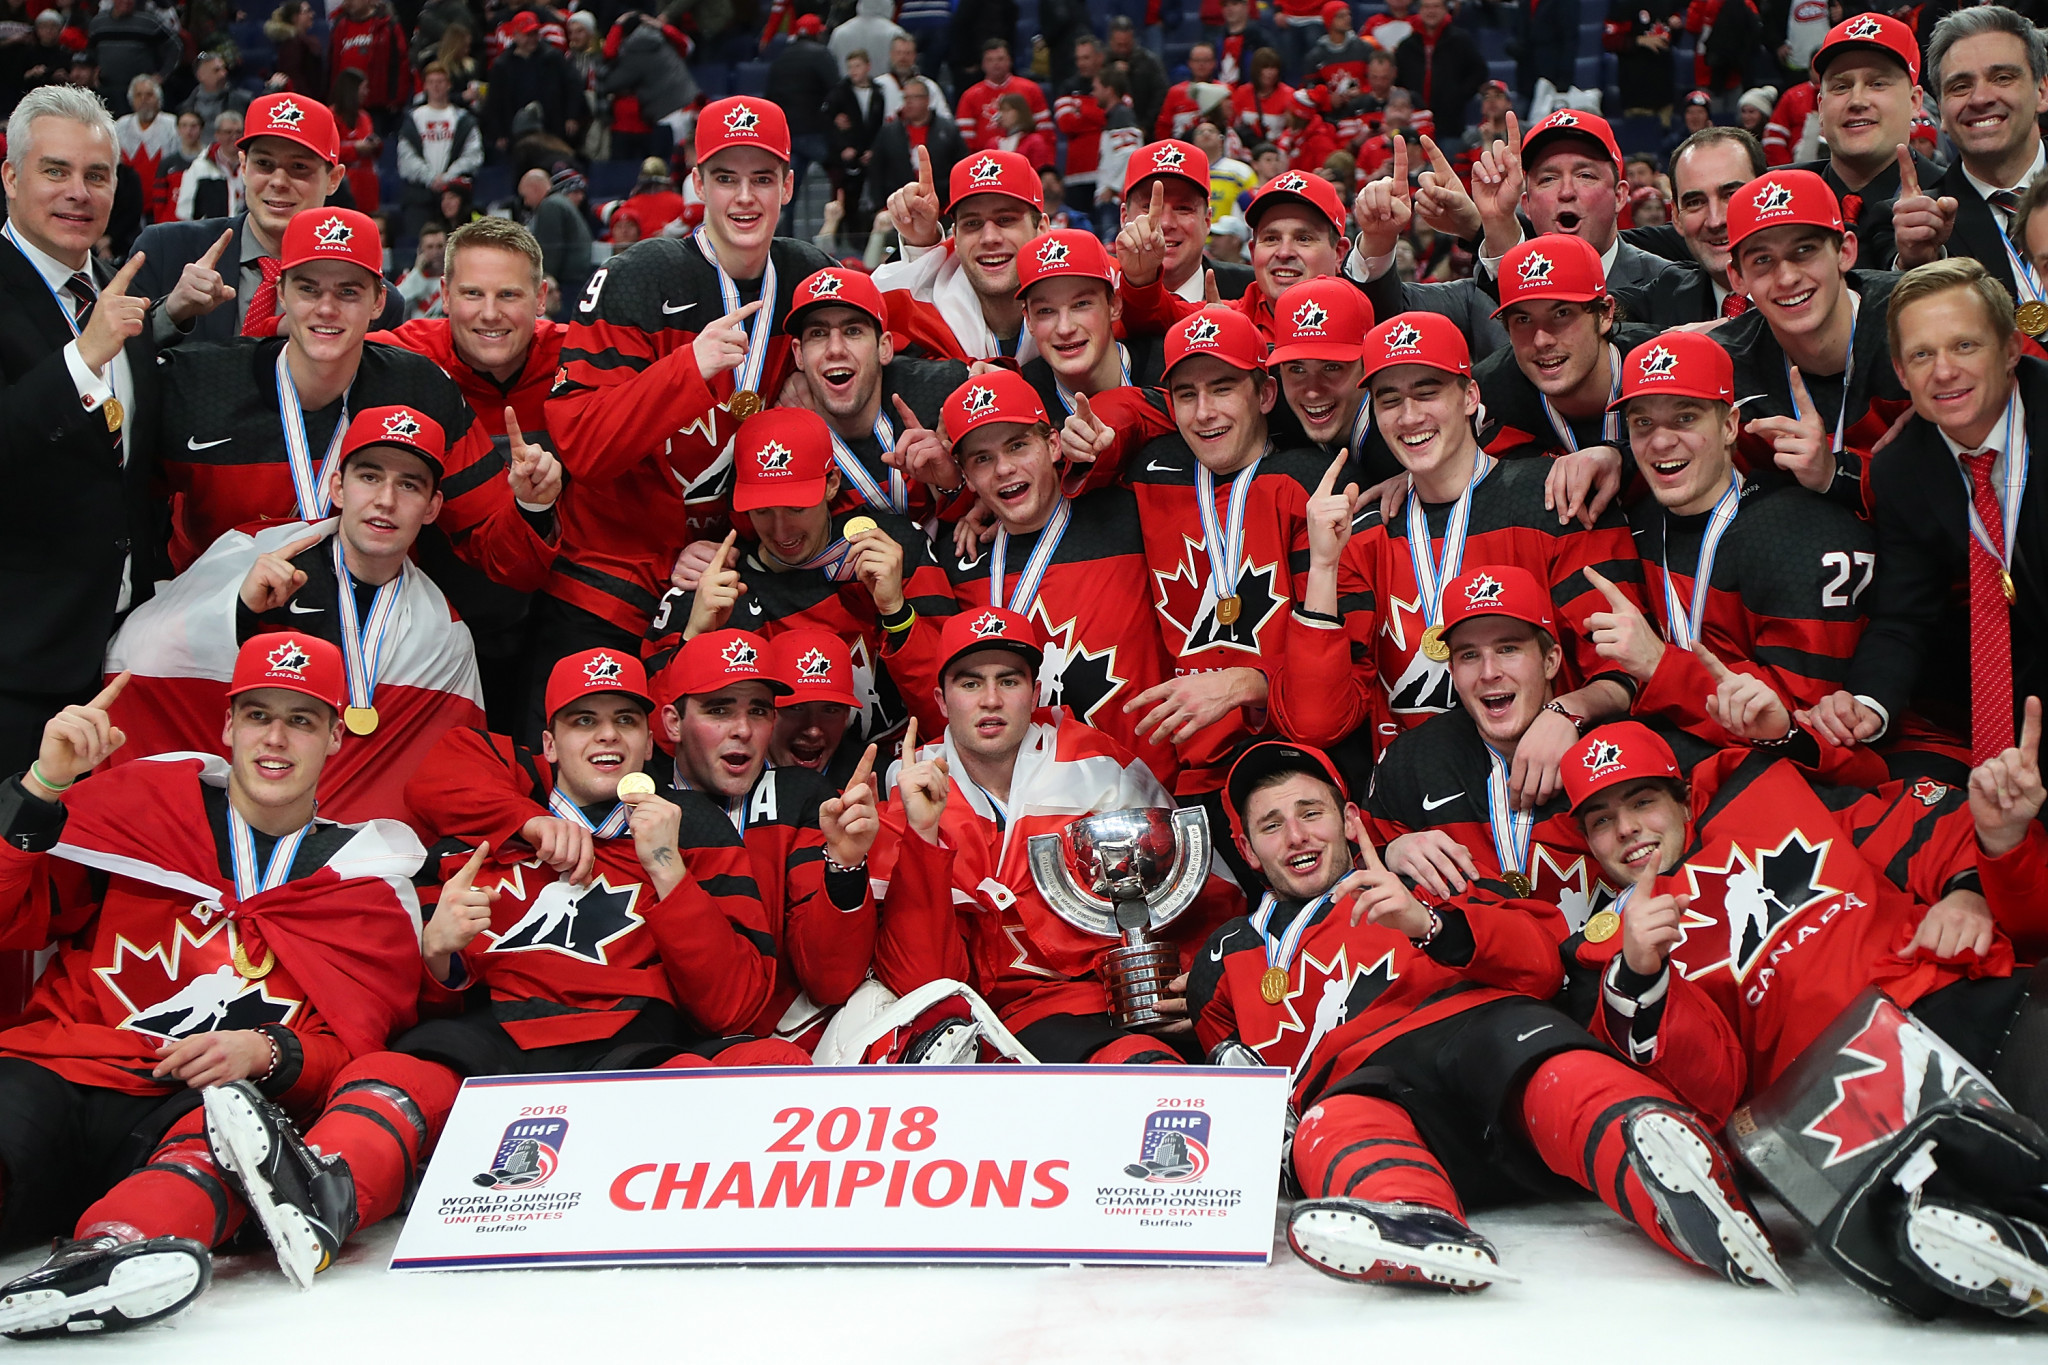 Police investigate two alleged sexual assaults as Hockey Canada scandal deepens photo